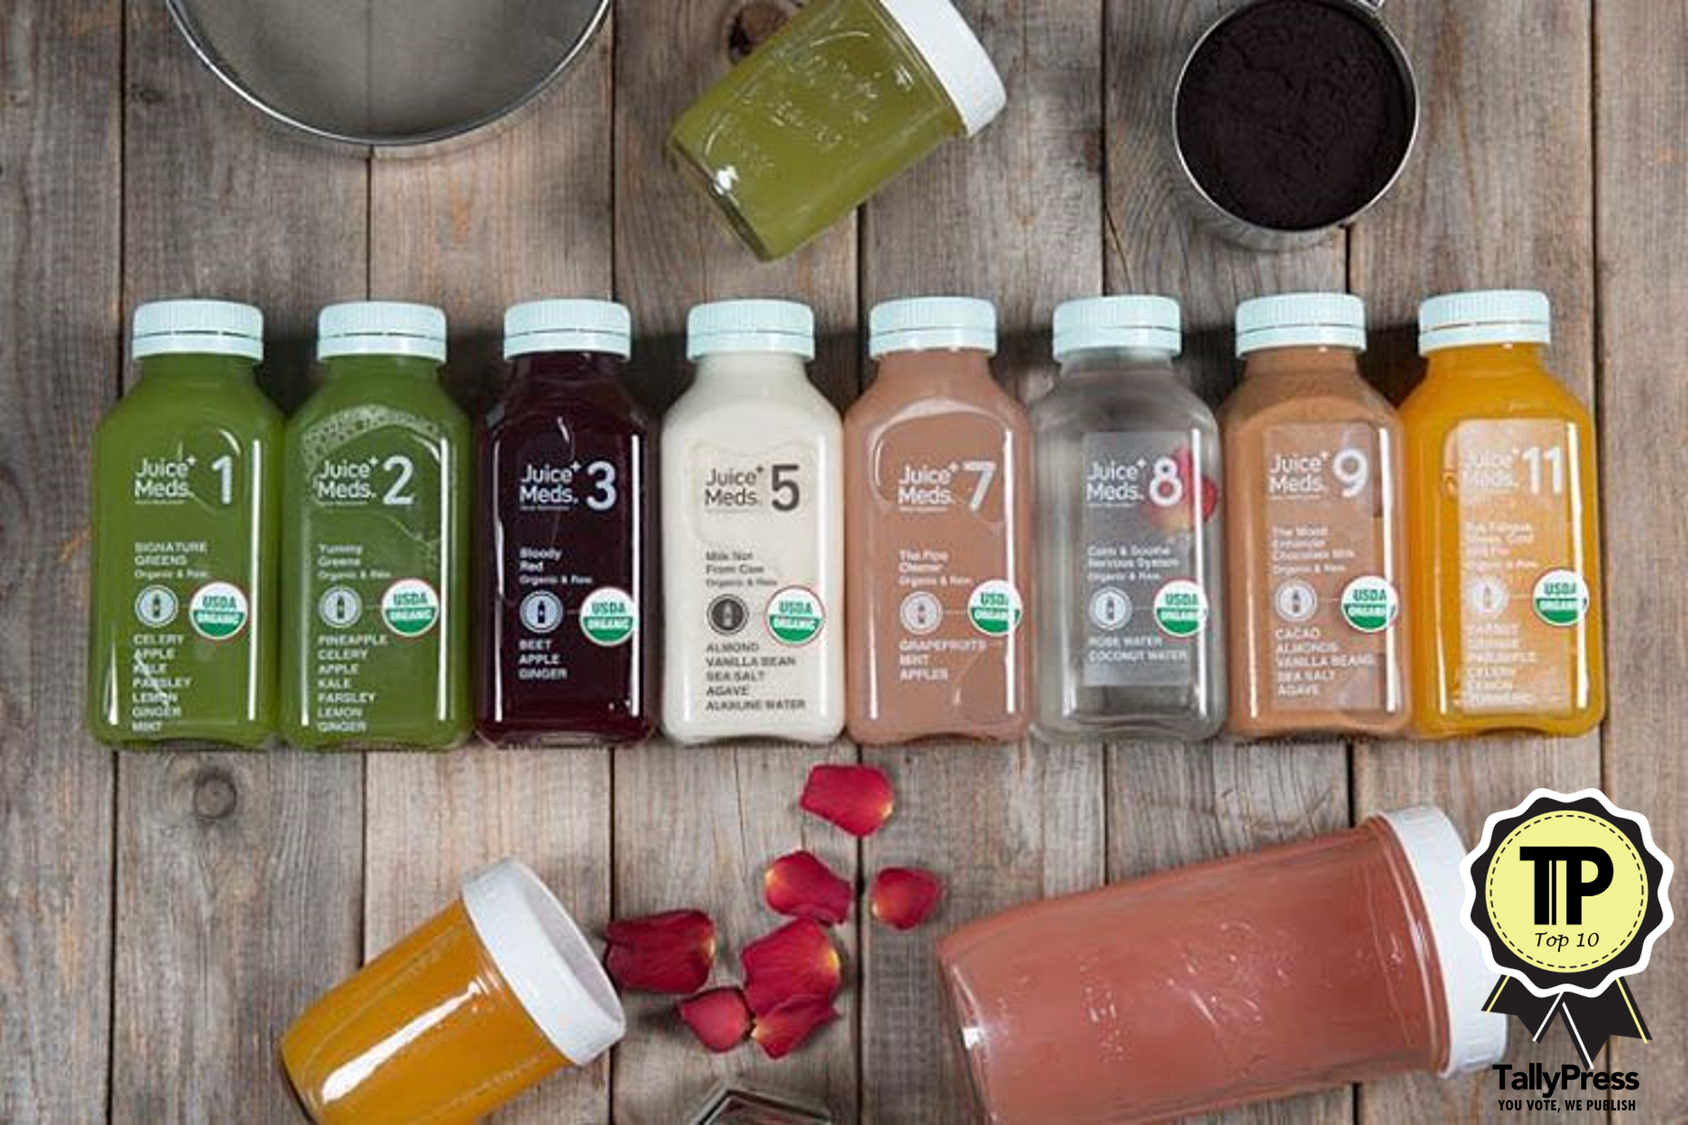 9-juice-meds-top-10-best-cold-pressed-juices-in-malaysia-jpg